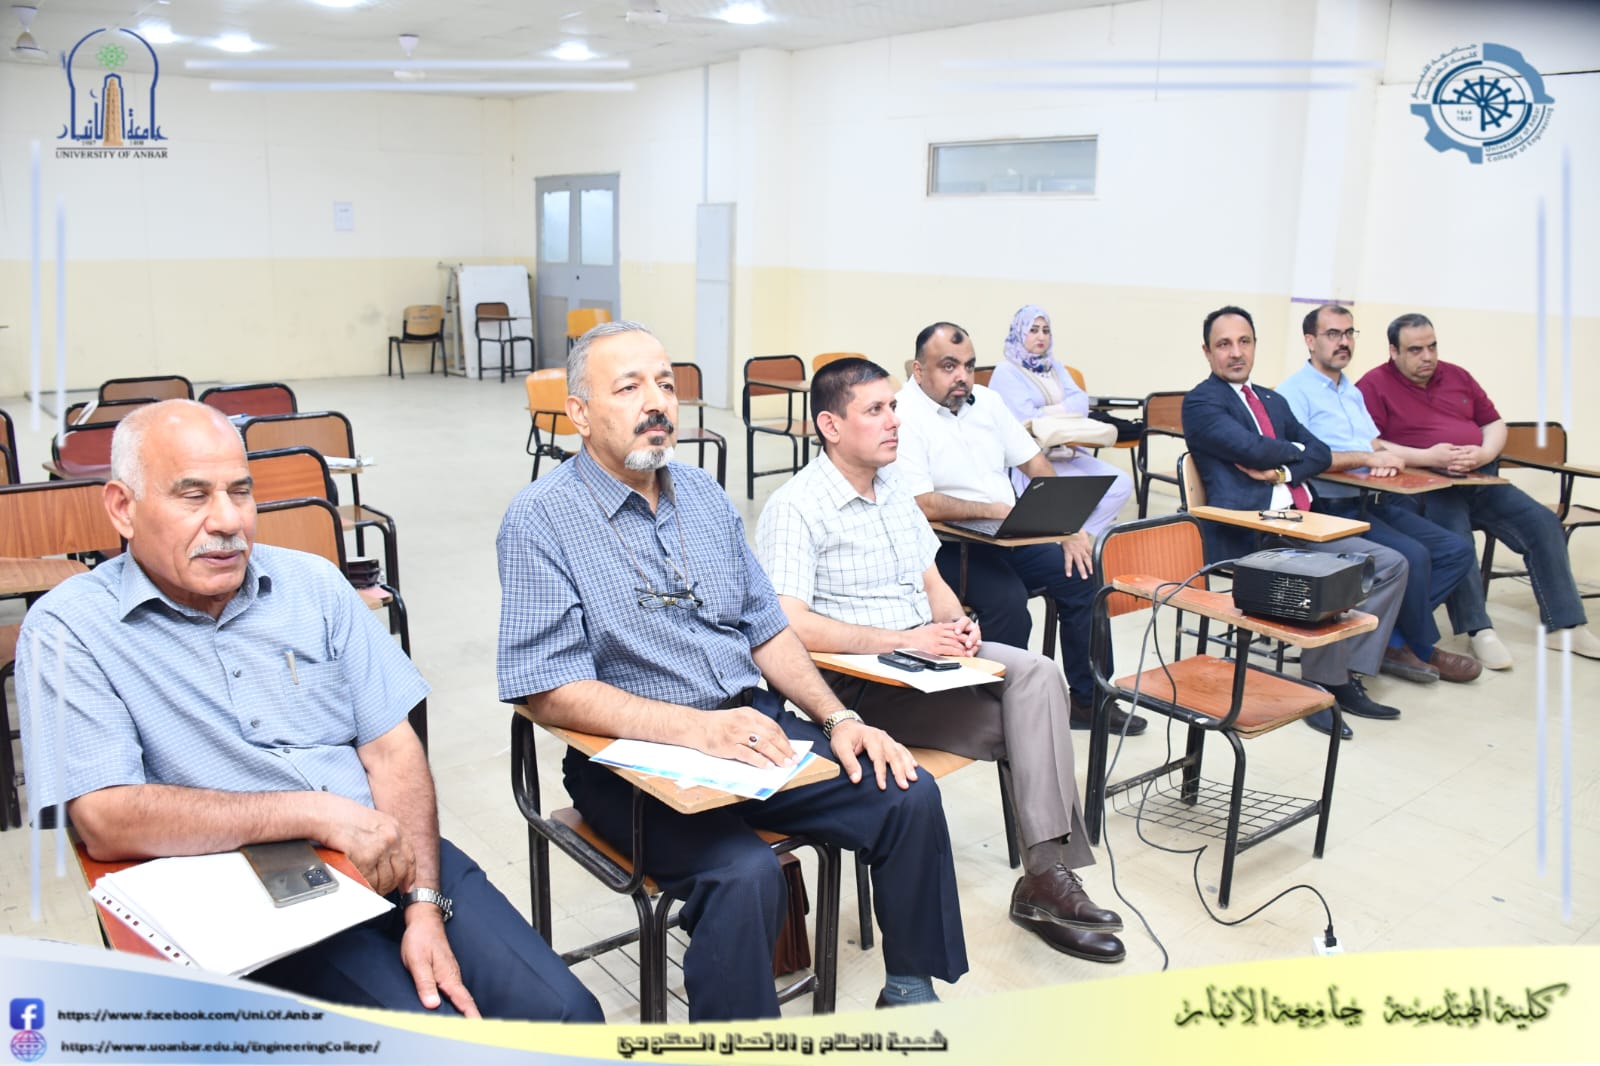 A workshop on “National Standards for Accreditation of Engineering Education Programs in Iraq.”